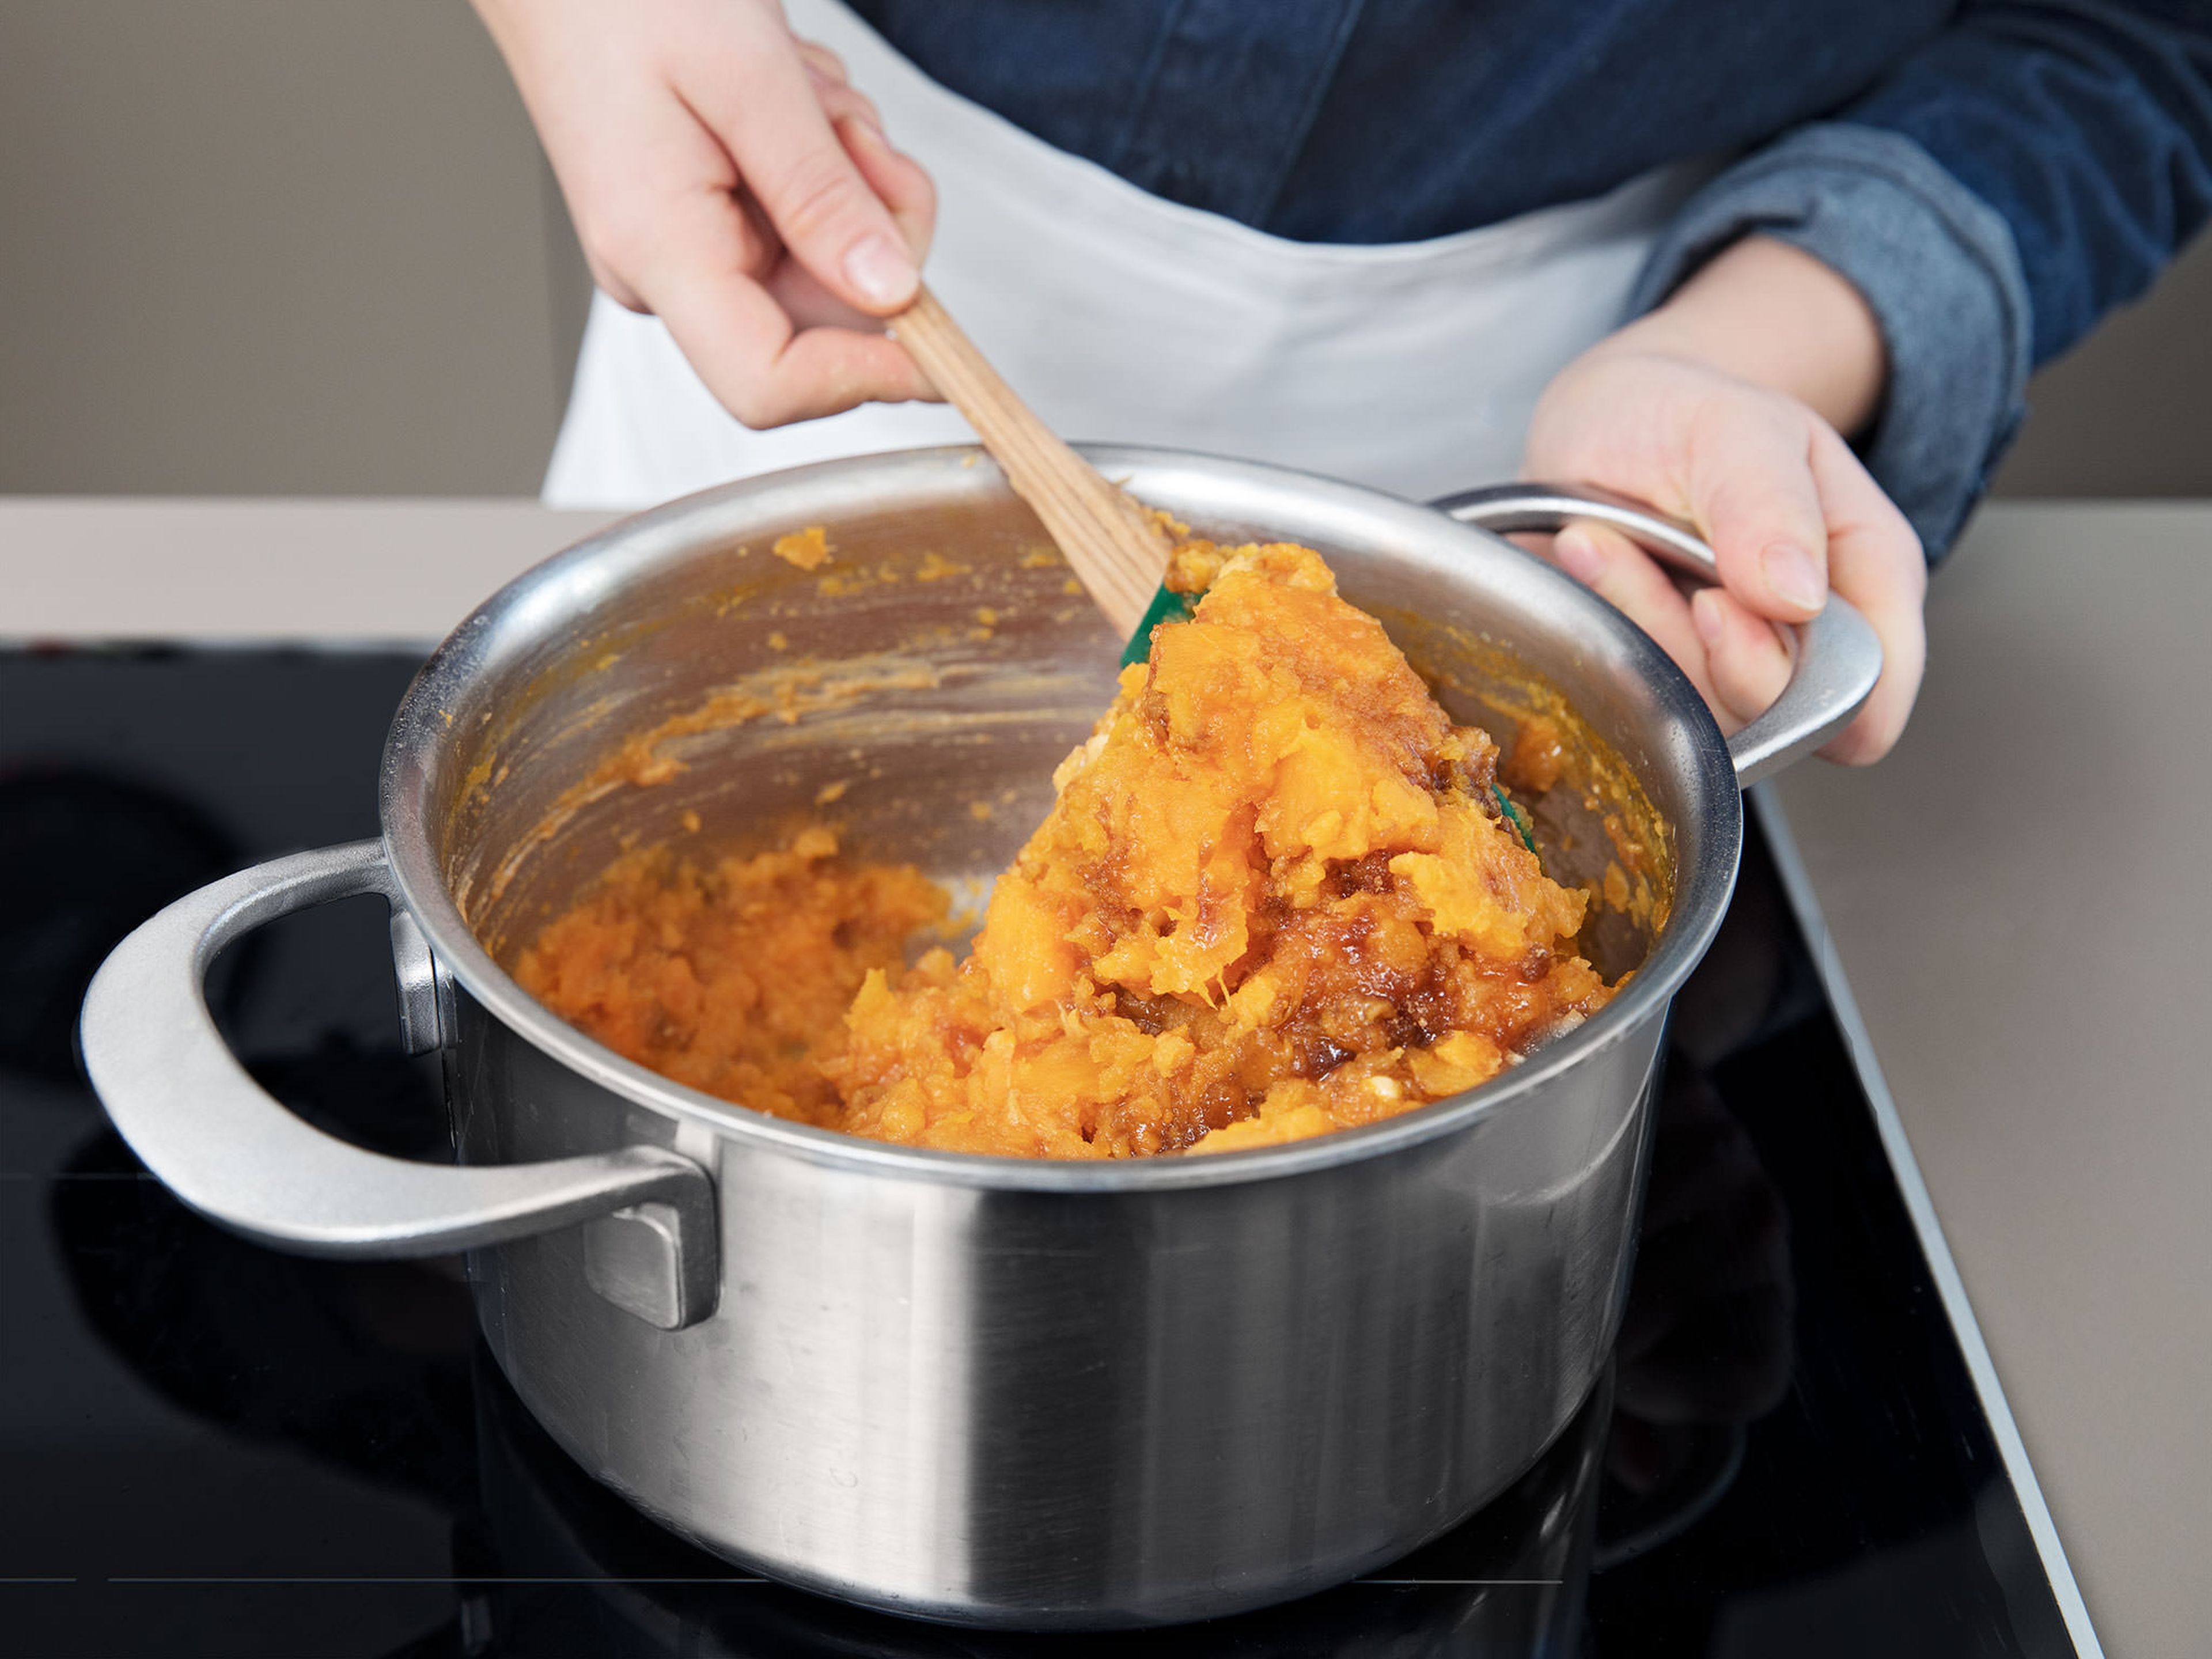 Add sweet potatoes to a large pot and cover with water. Add the butter. Bring to a boil over medium-high heat for approx. 20 – 30 min. (time depends on size of chunks). They are done when you can easily stick a fork through them. Don't overcook. Drain about three quarters of the water from your pot and return to stove.